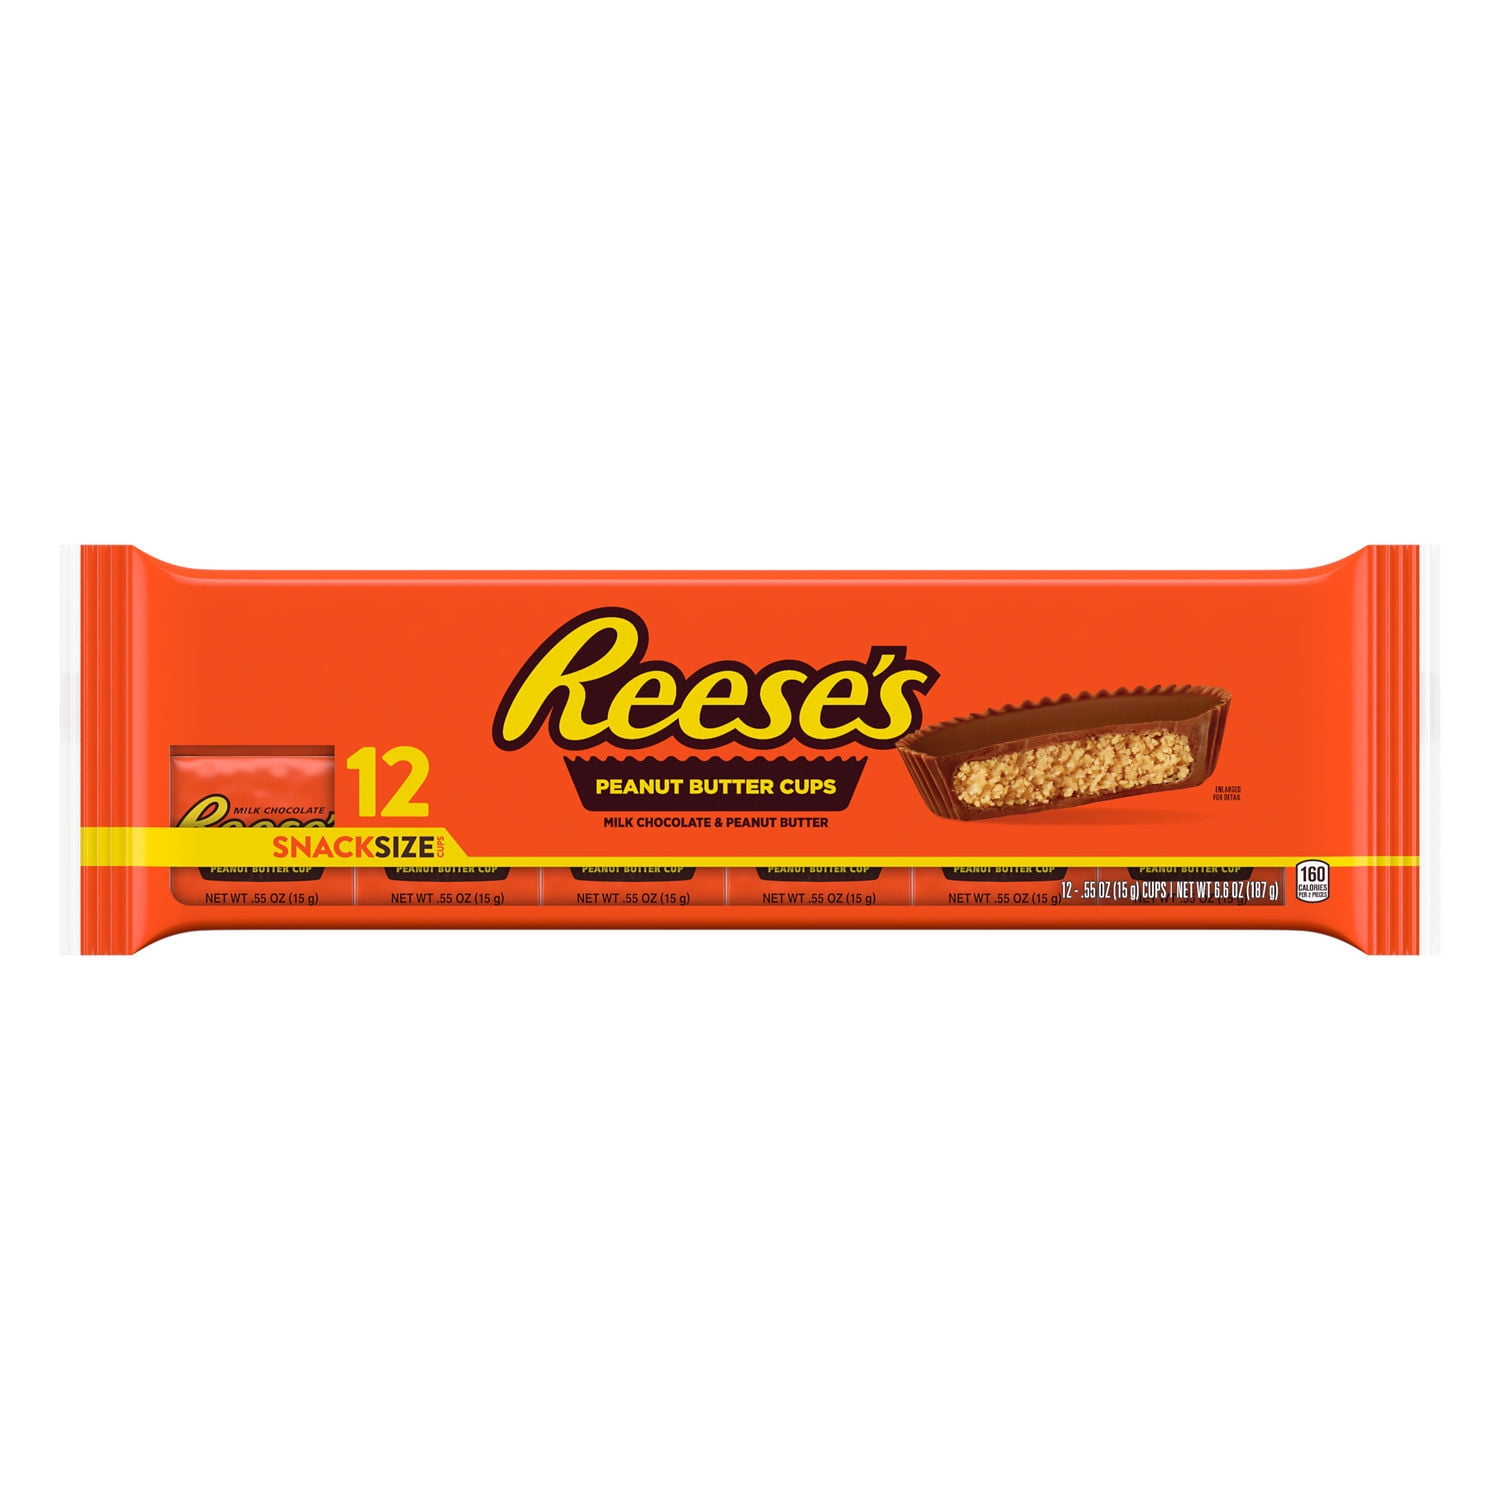 Reese's, Milk Chocolate Peanut Butter Snack Size Cups Candy, Gluten Free, 0.55 oz, Packs (12 Ct)